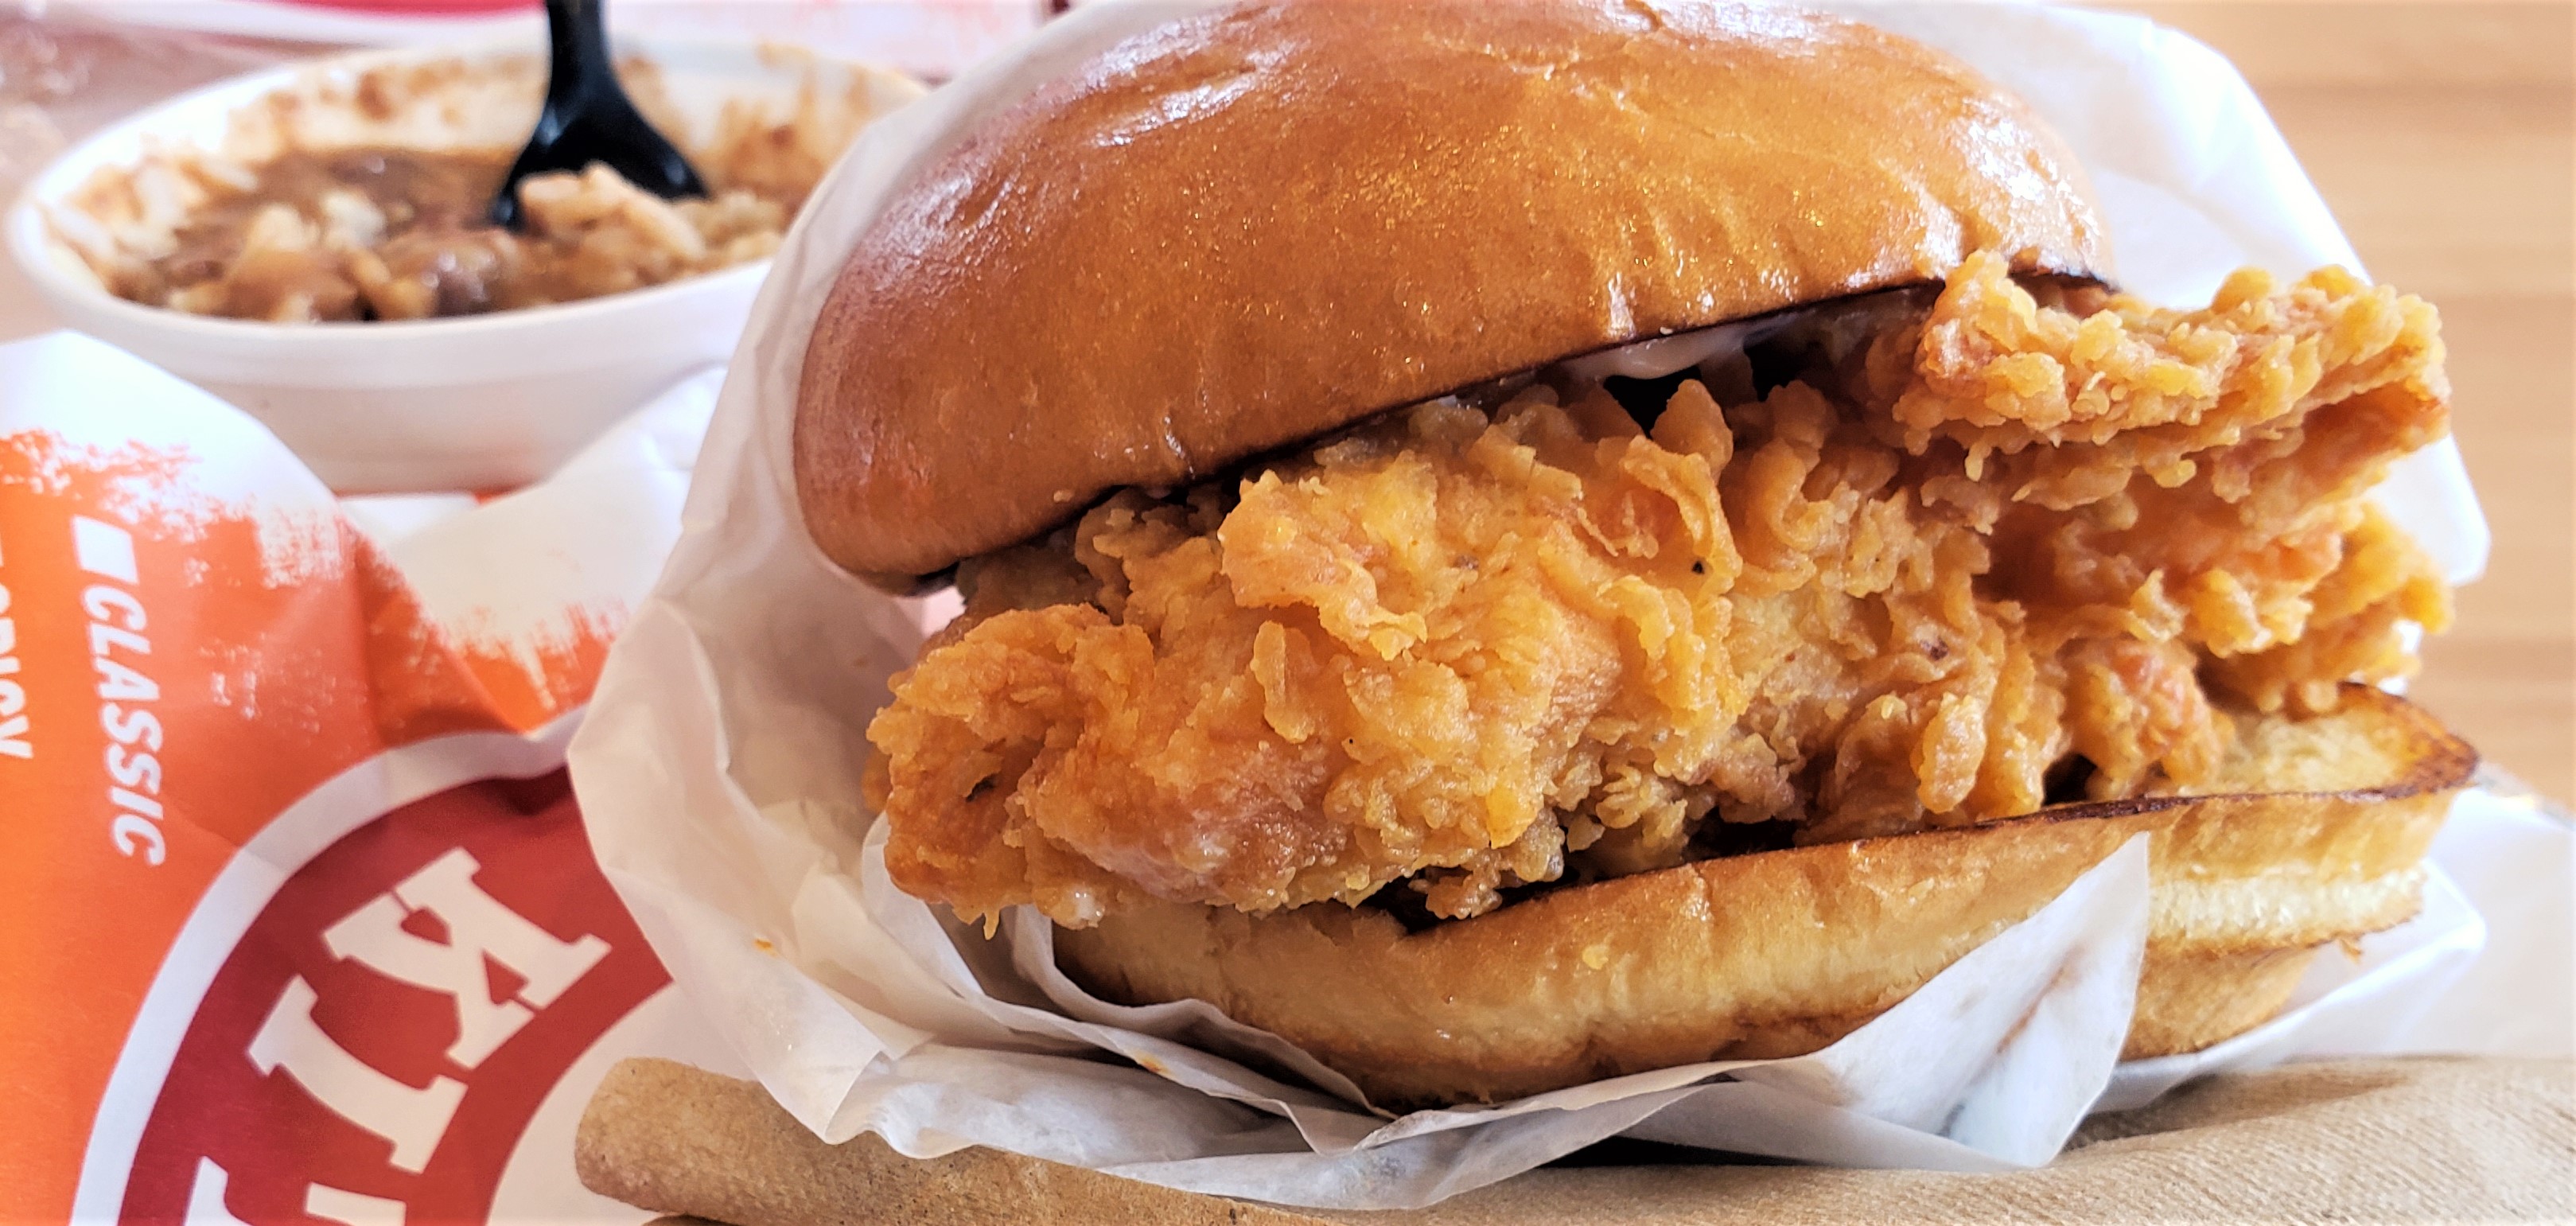 The New Chicken Sandwich @Popeye’s – Wanted:Frycook